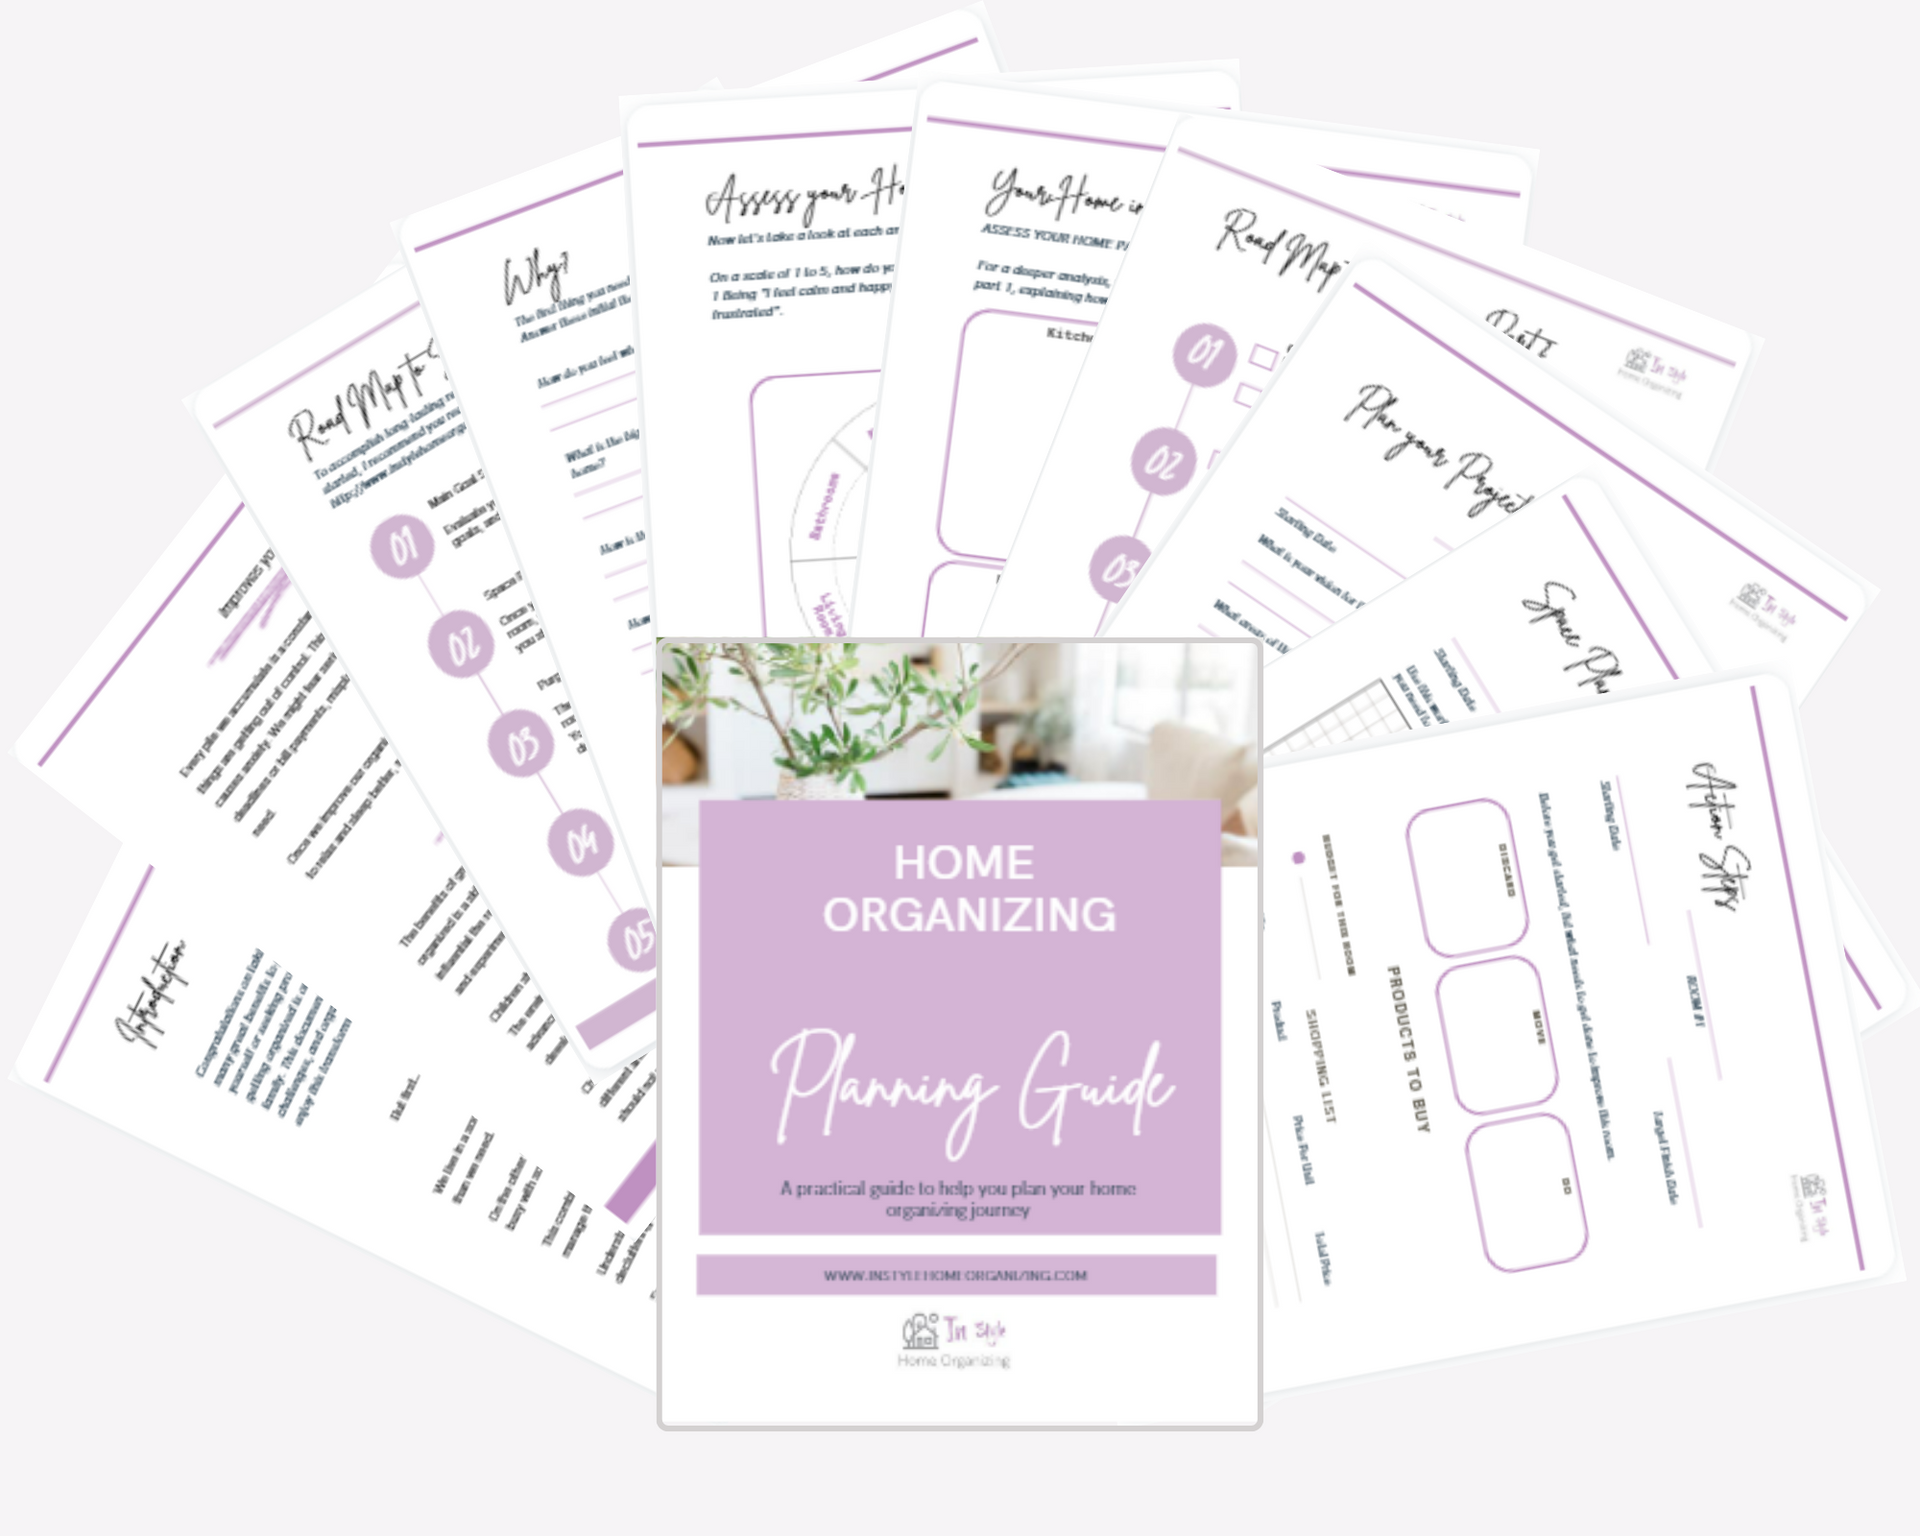 Home organizing planning guide designed by a top professional organizer in New Jersey 2